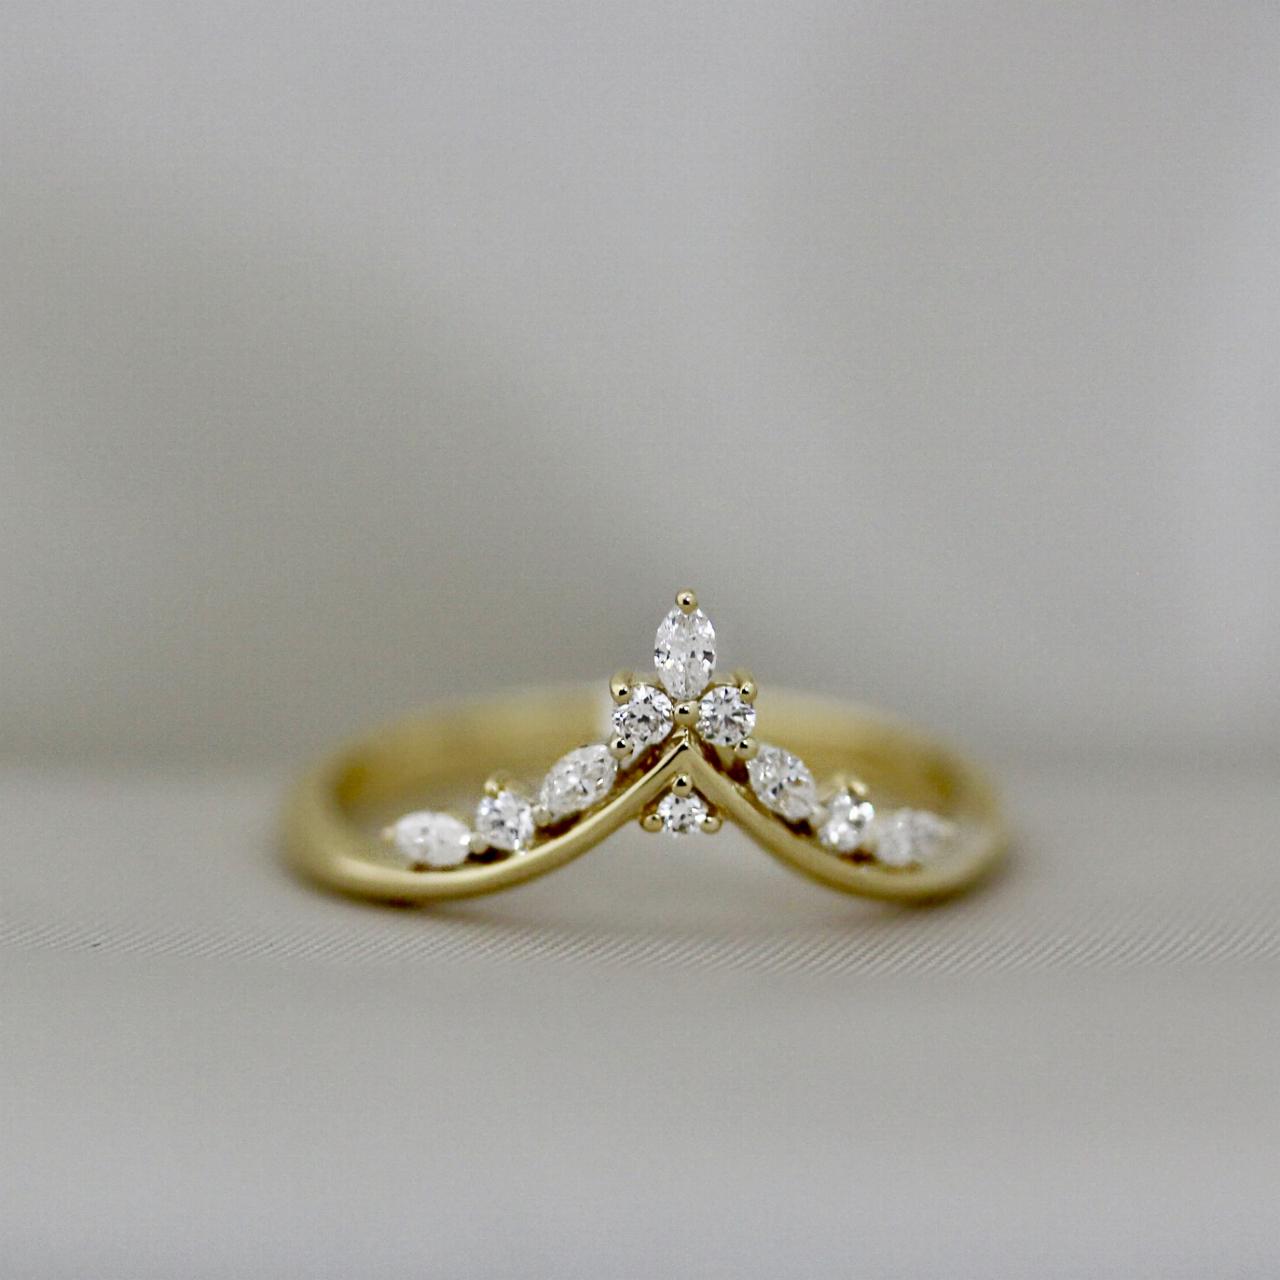 The LD ‘Princess’ Ring in 18ct yellow